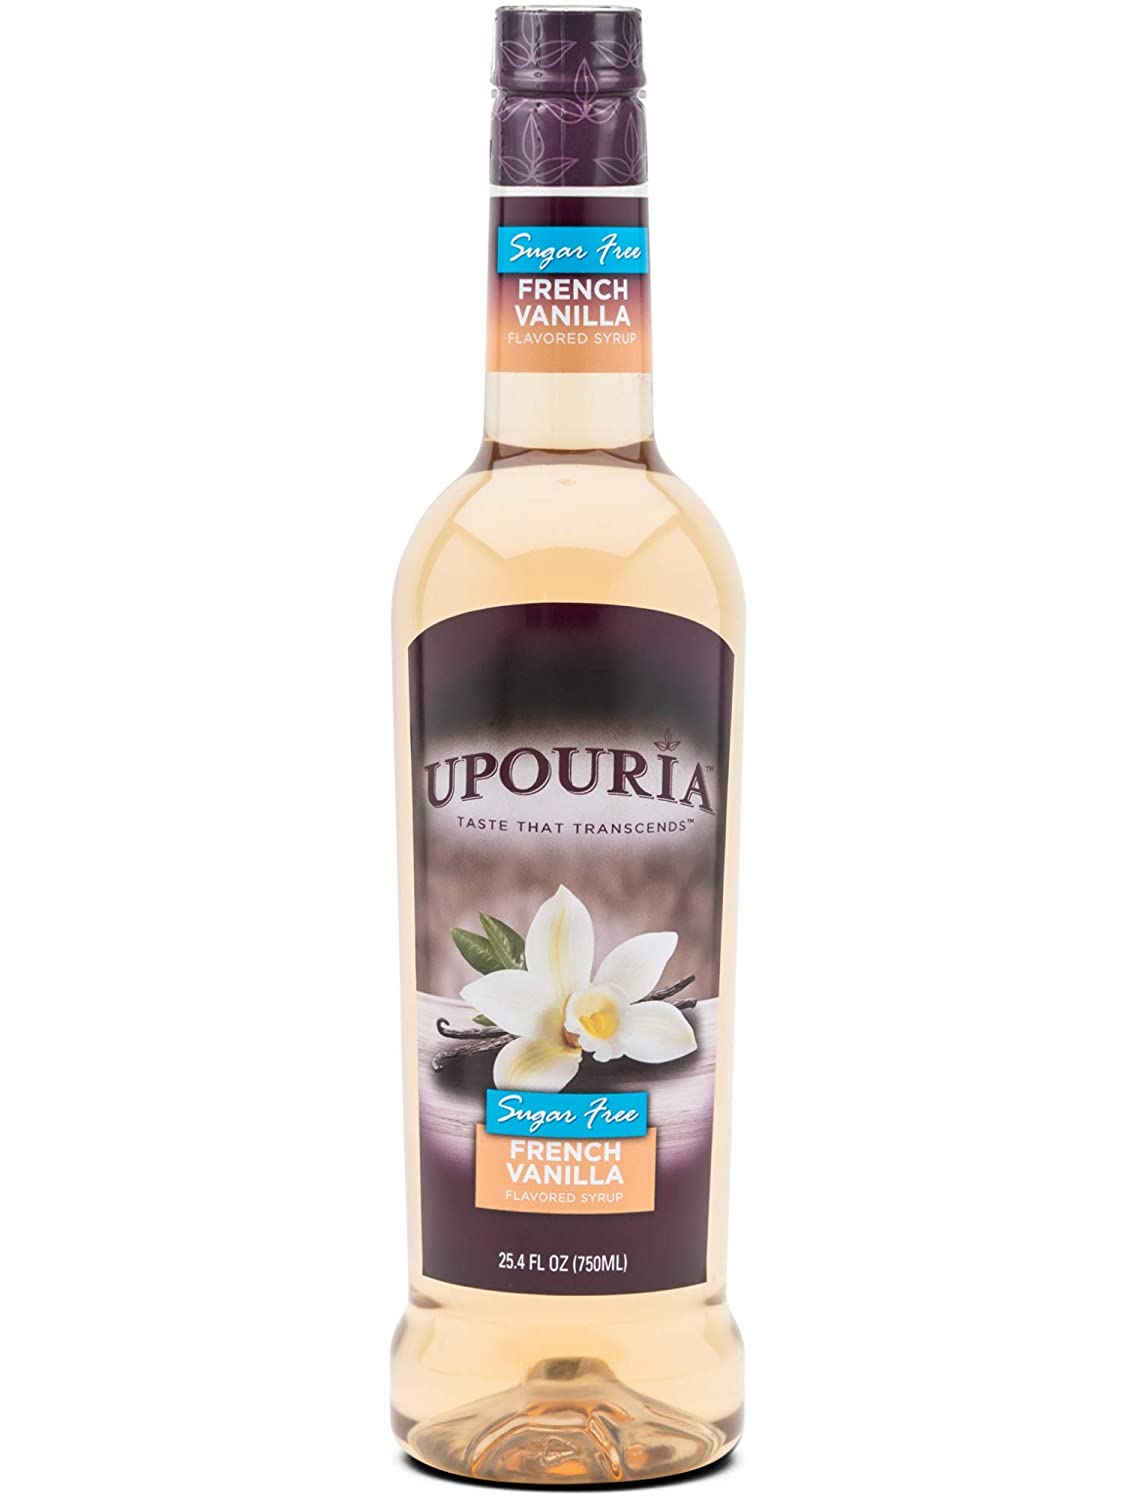 Upouria Coffee Syrup - Sugar Free French Vanilla Flavoring, 100% Gluten Free, Vegan, and Non Dairy 750 mL Bottle